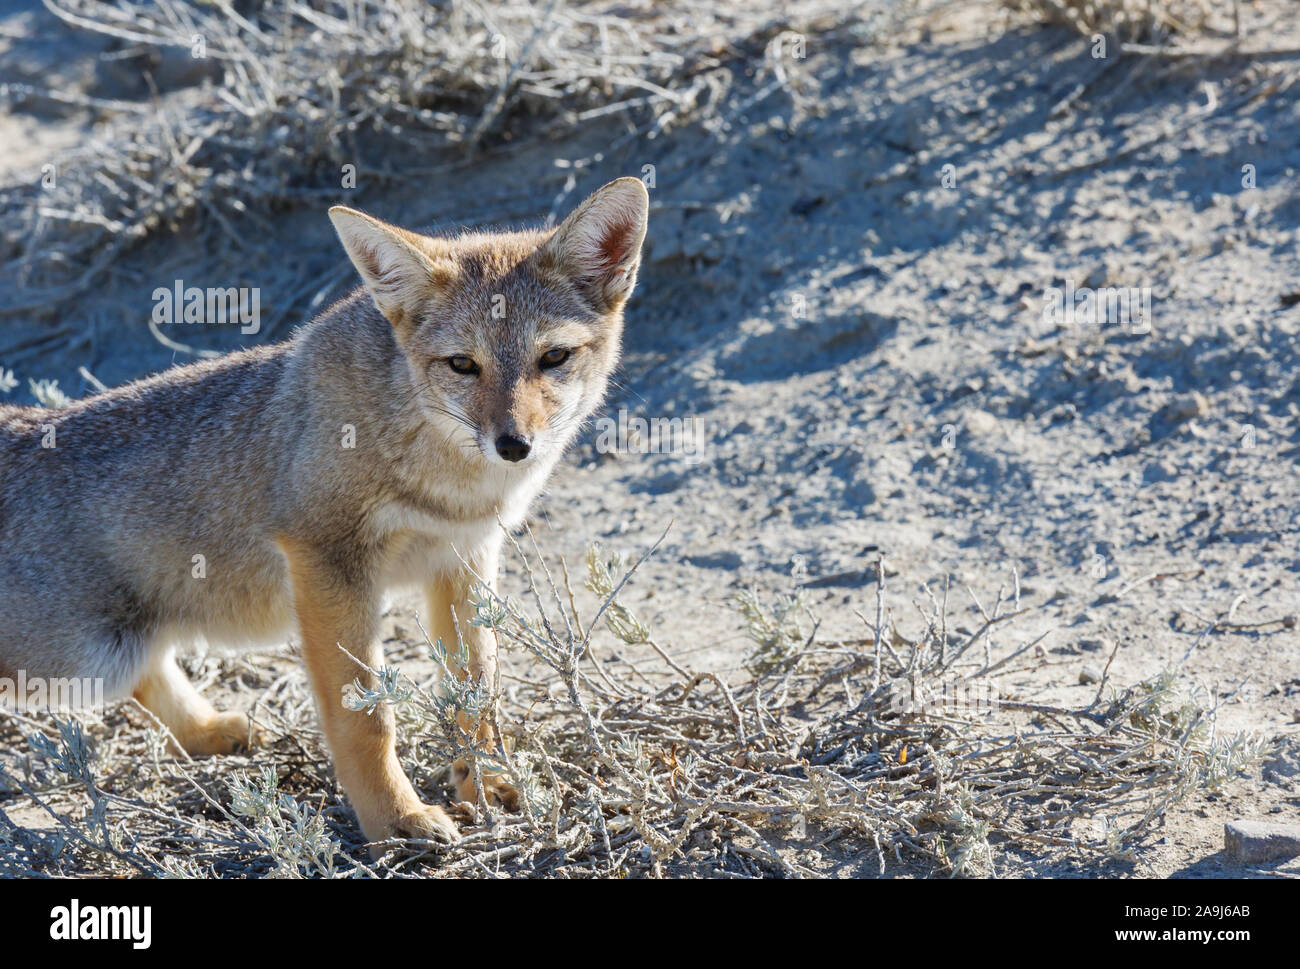 South American gray fox (Lycalopex griseus), Patagonian fox, in Patagonia mountains Stock Photo